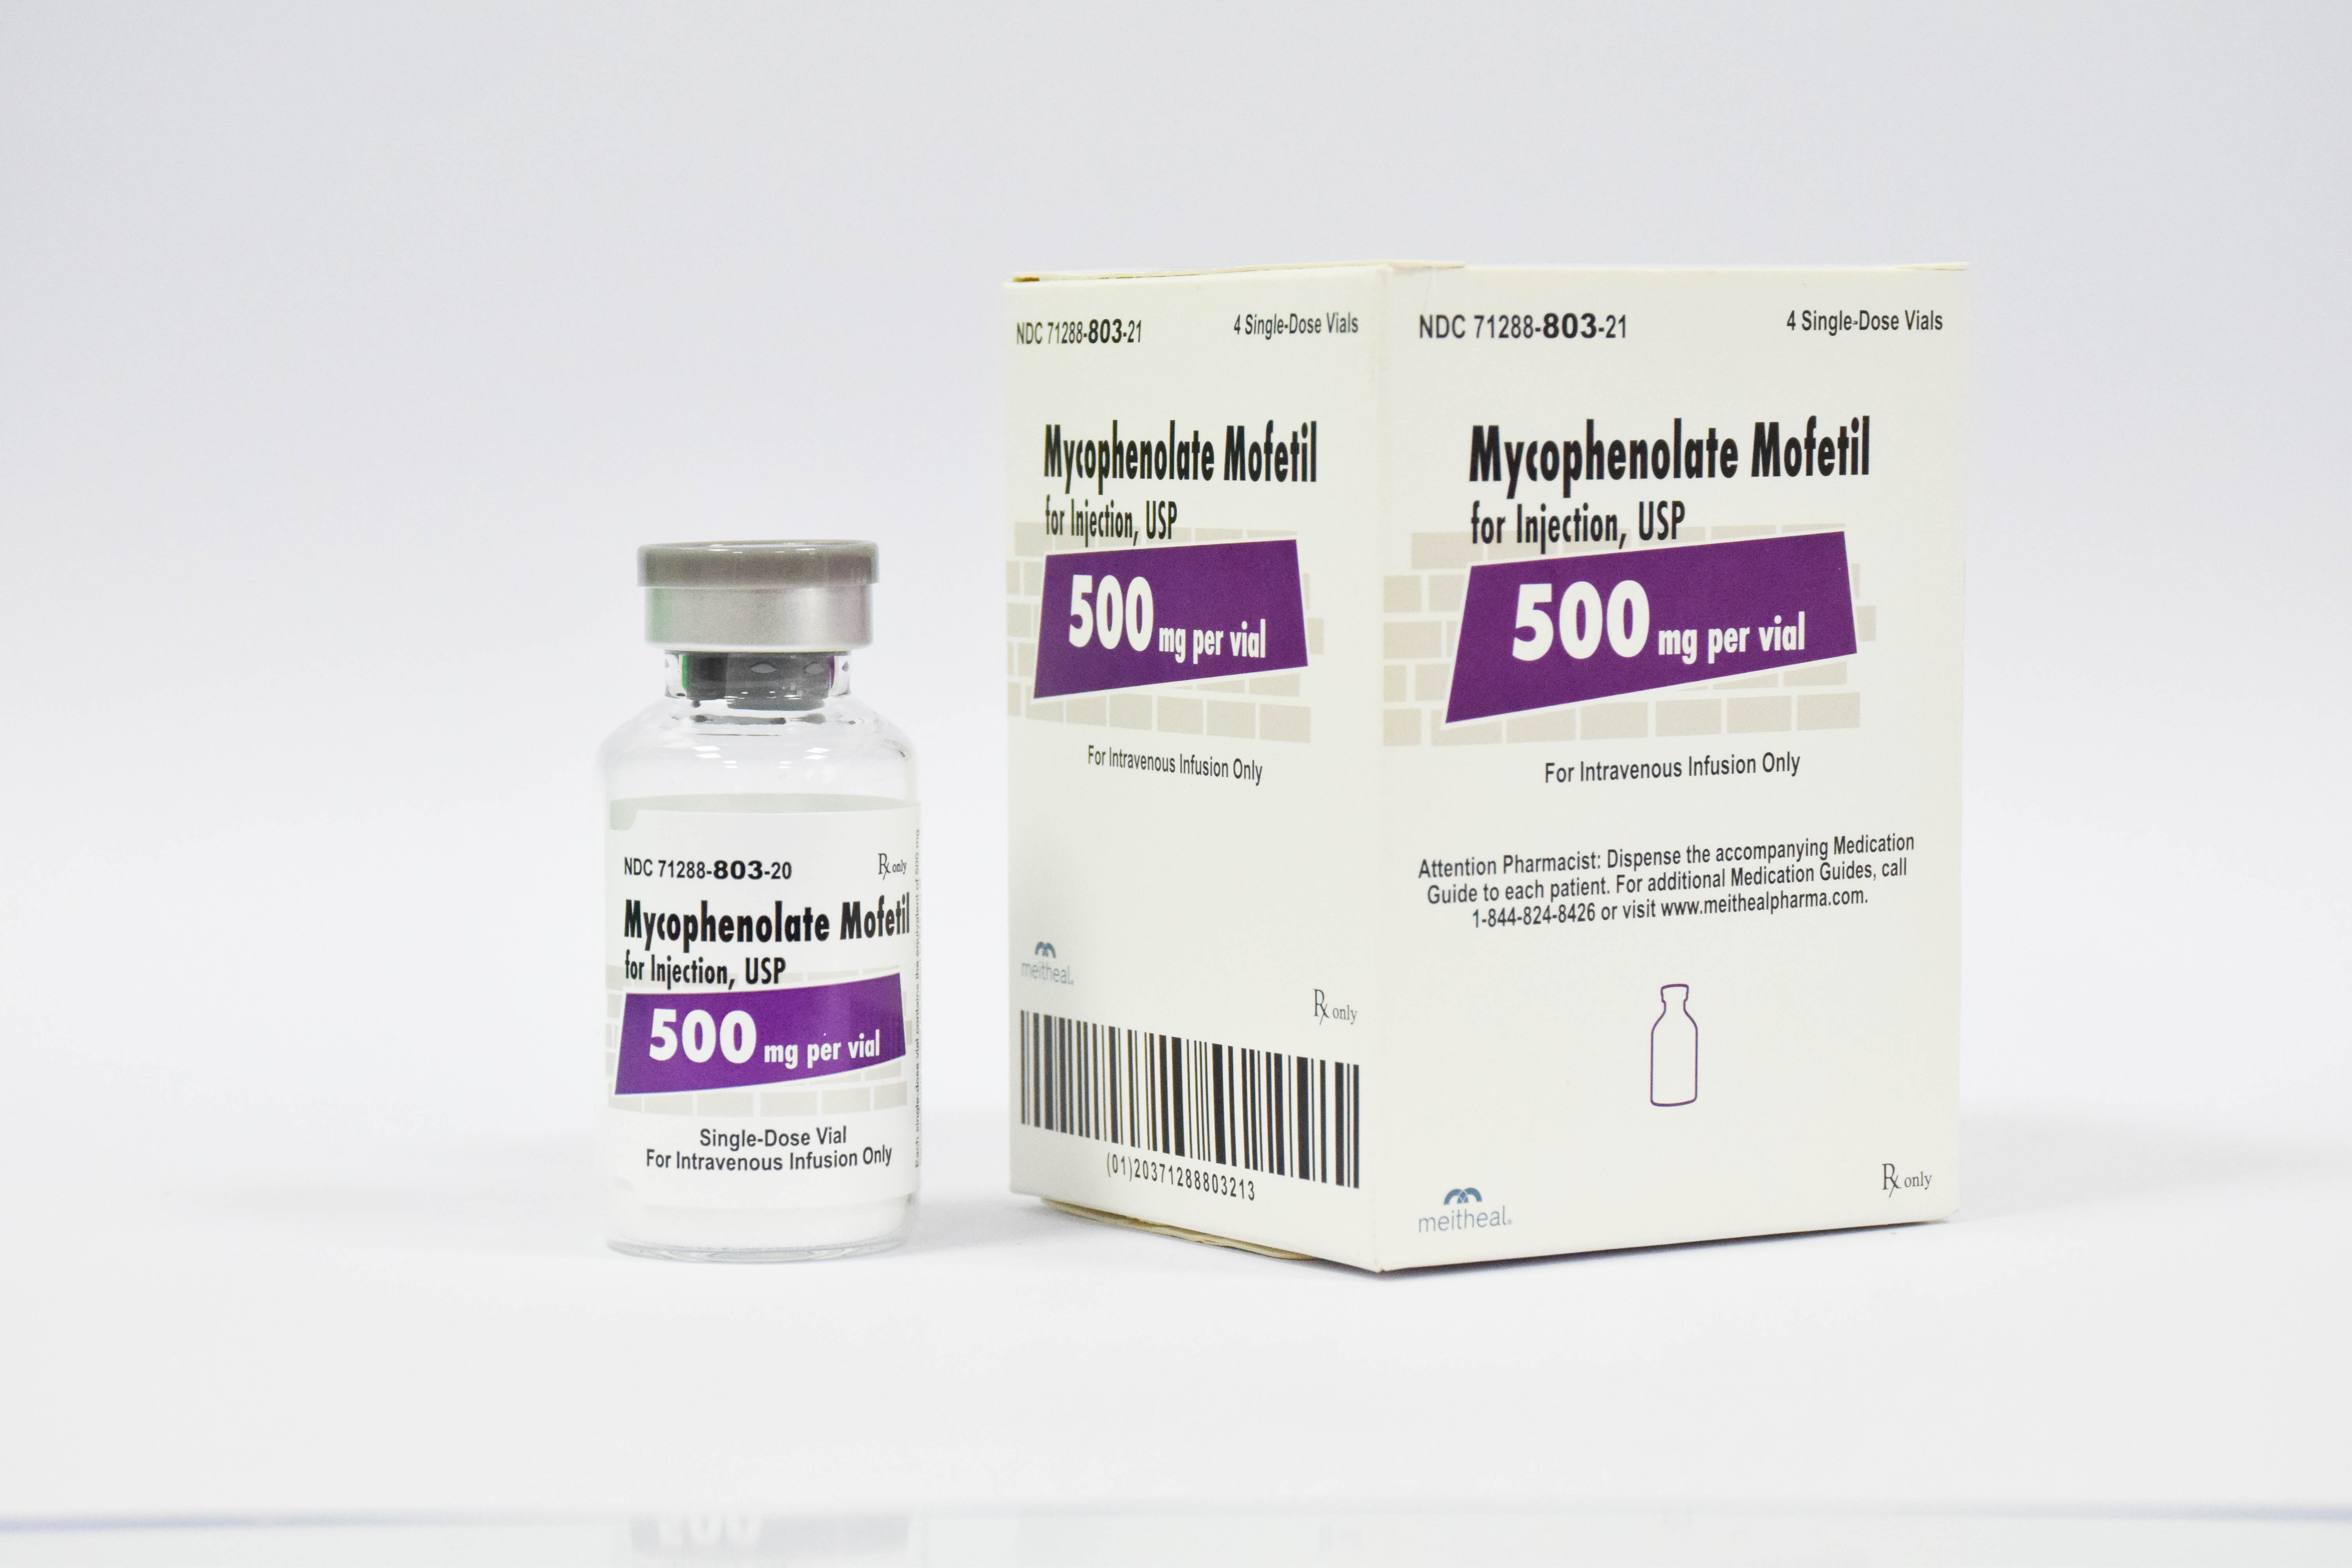 Mycophenolate Mofetil for Injection